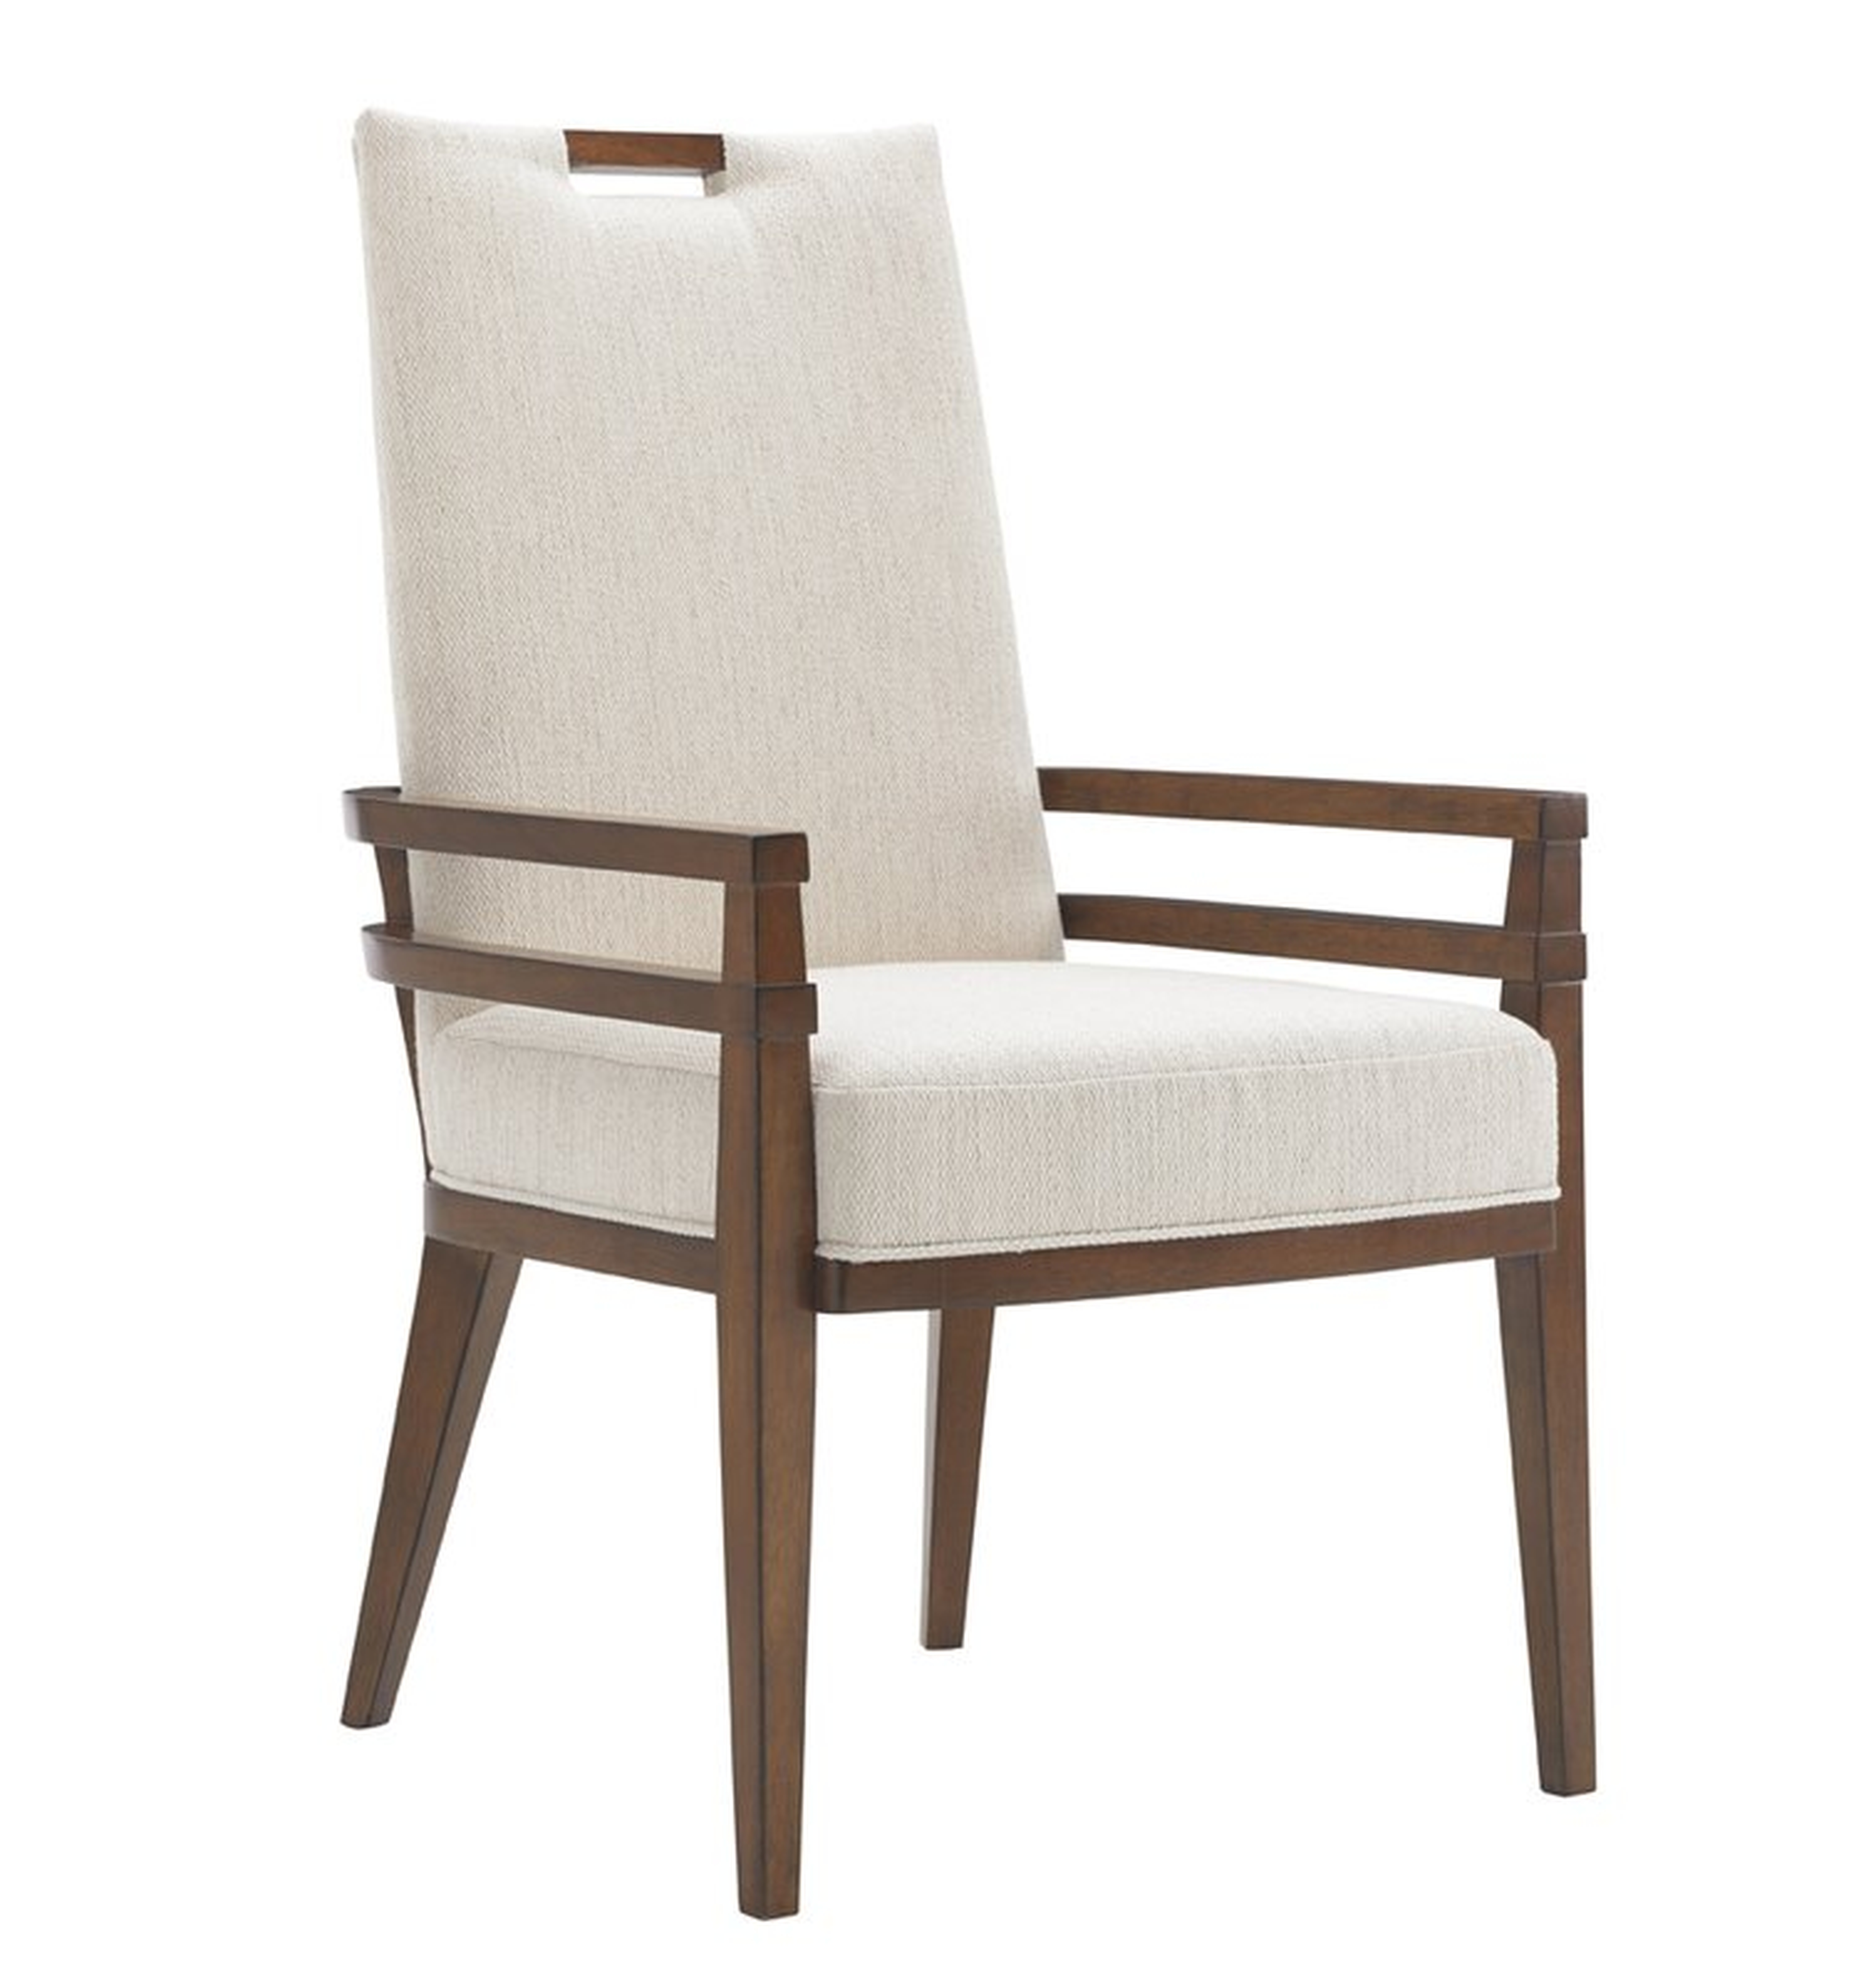 Tommy Bahama Home Island Fusion Coles Bay Upholstered Dining Chair Upholstery Color: White - Perigold